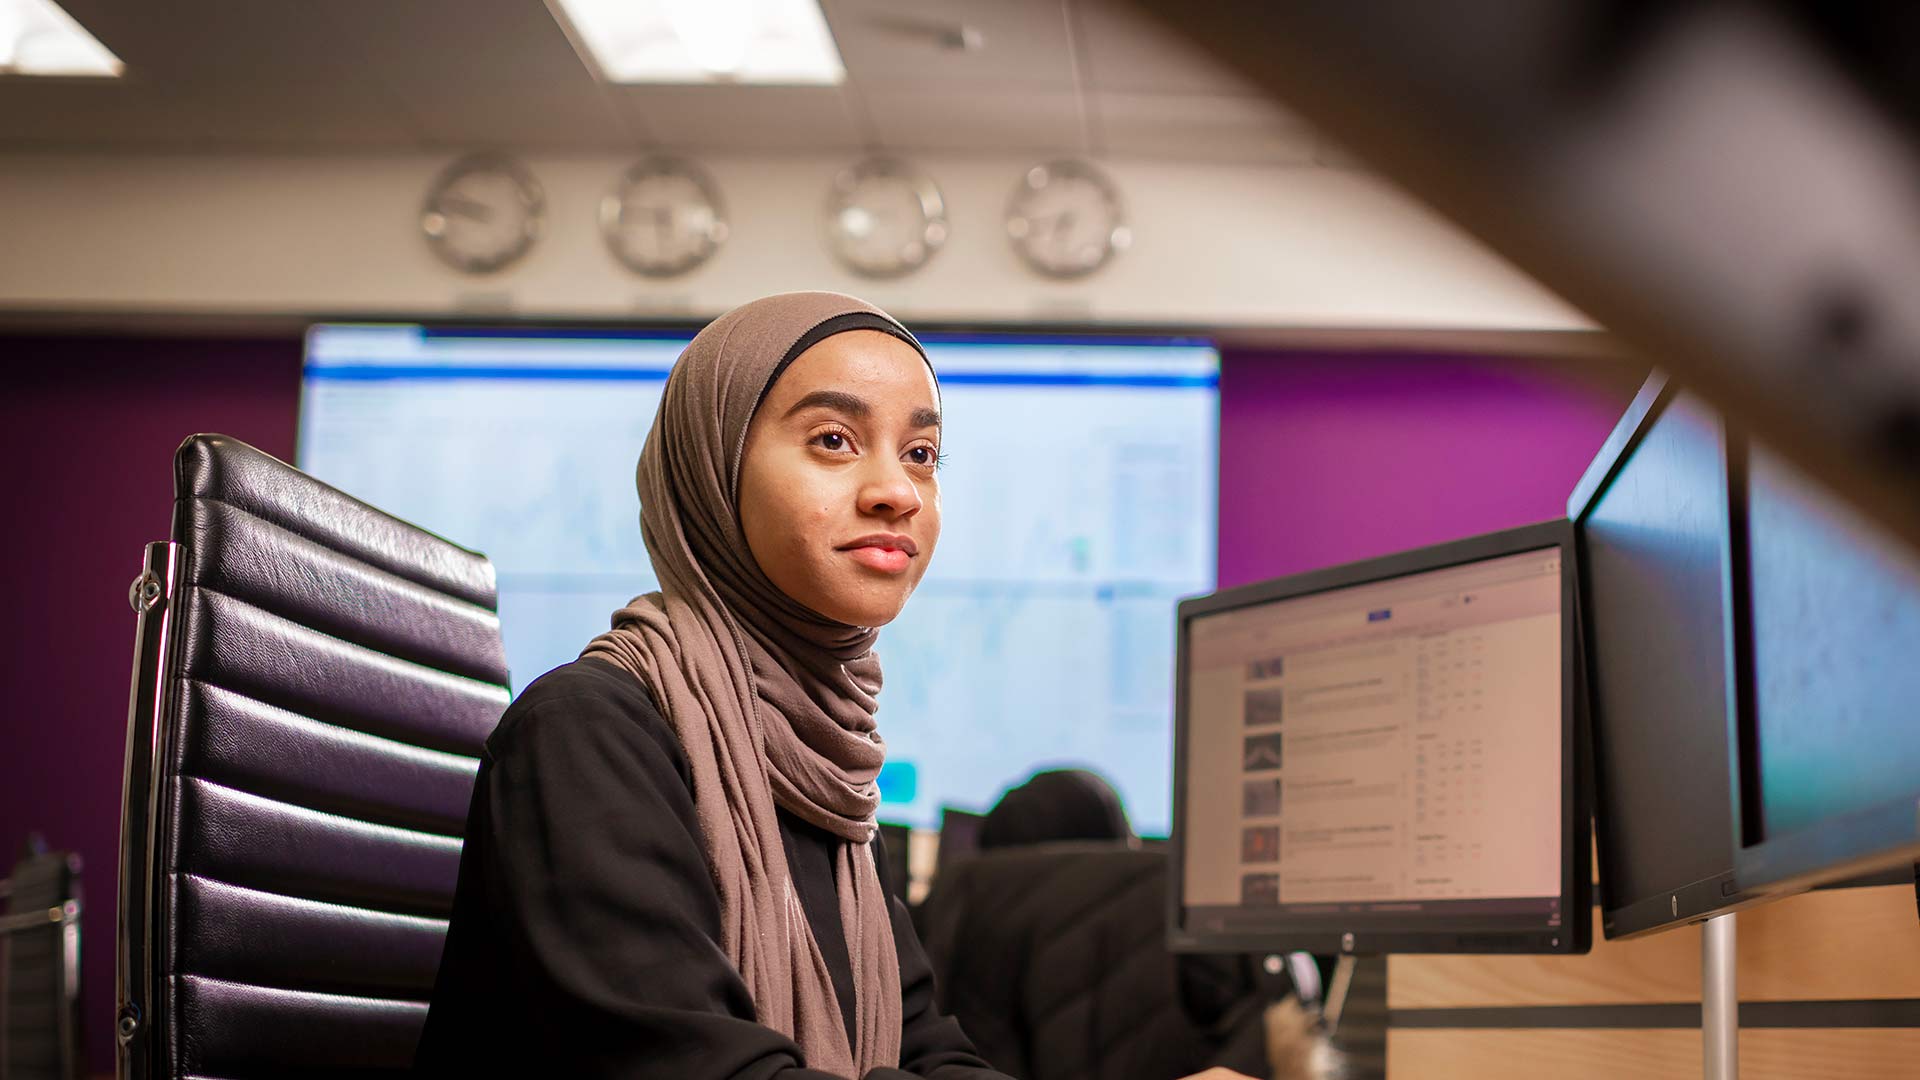 Student wearing a headscarf working at dual screen desktop